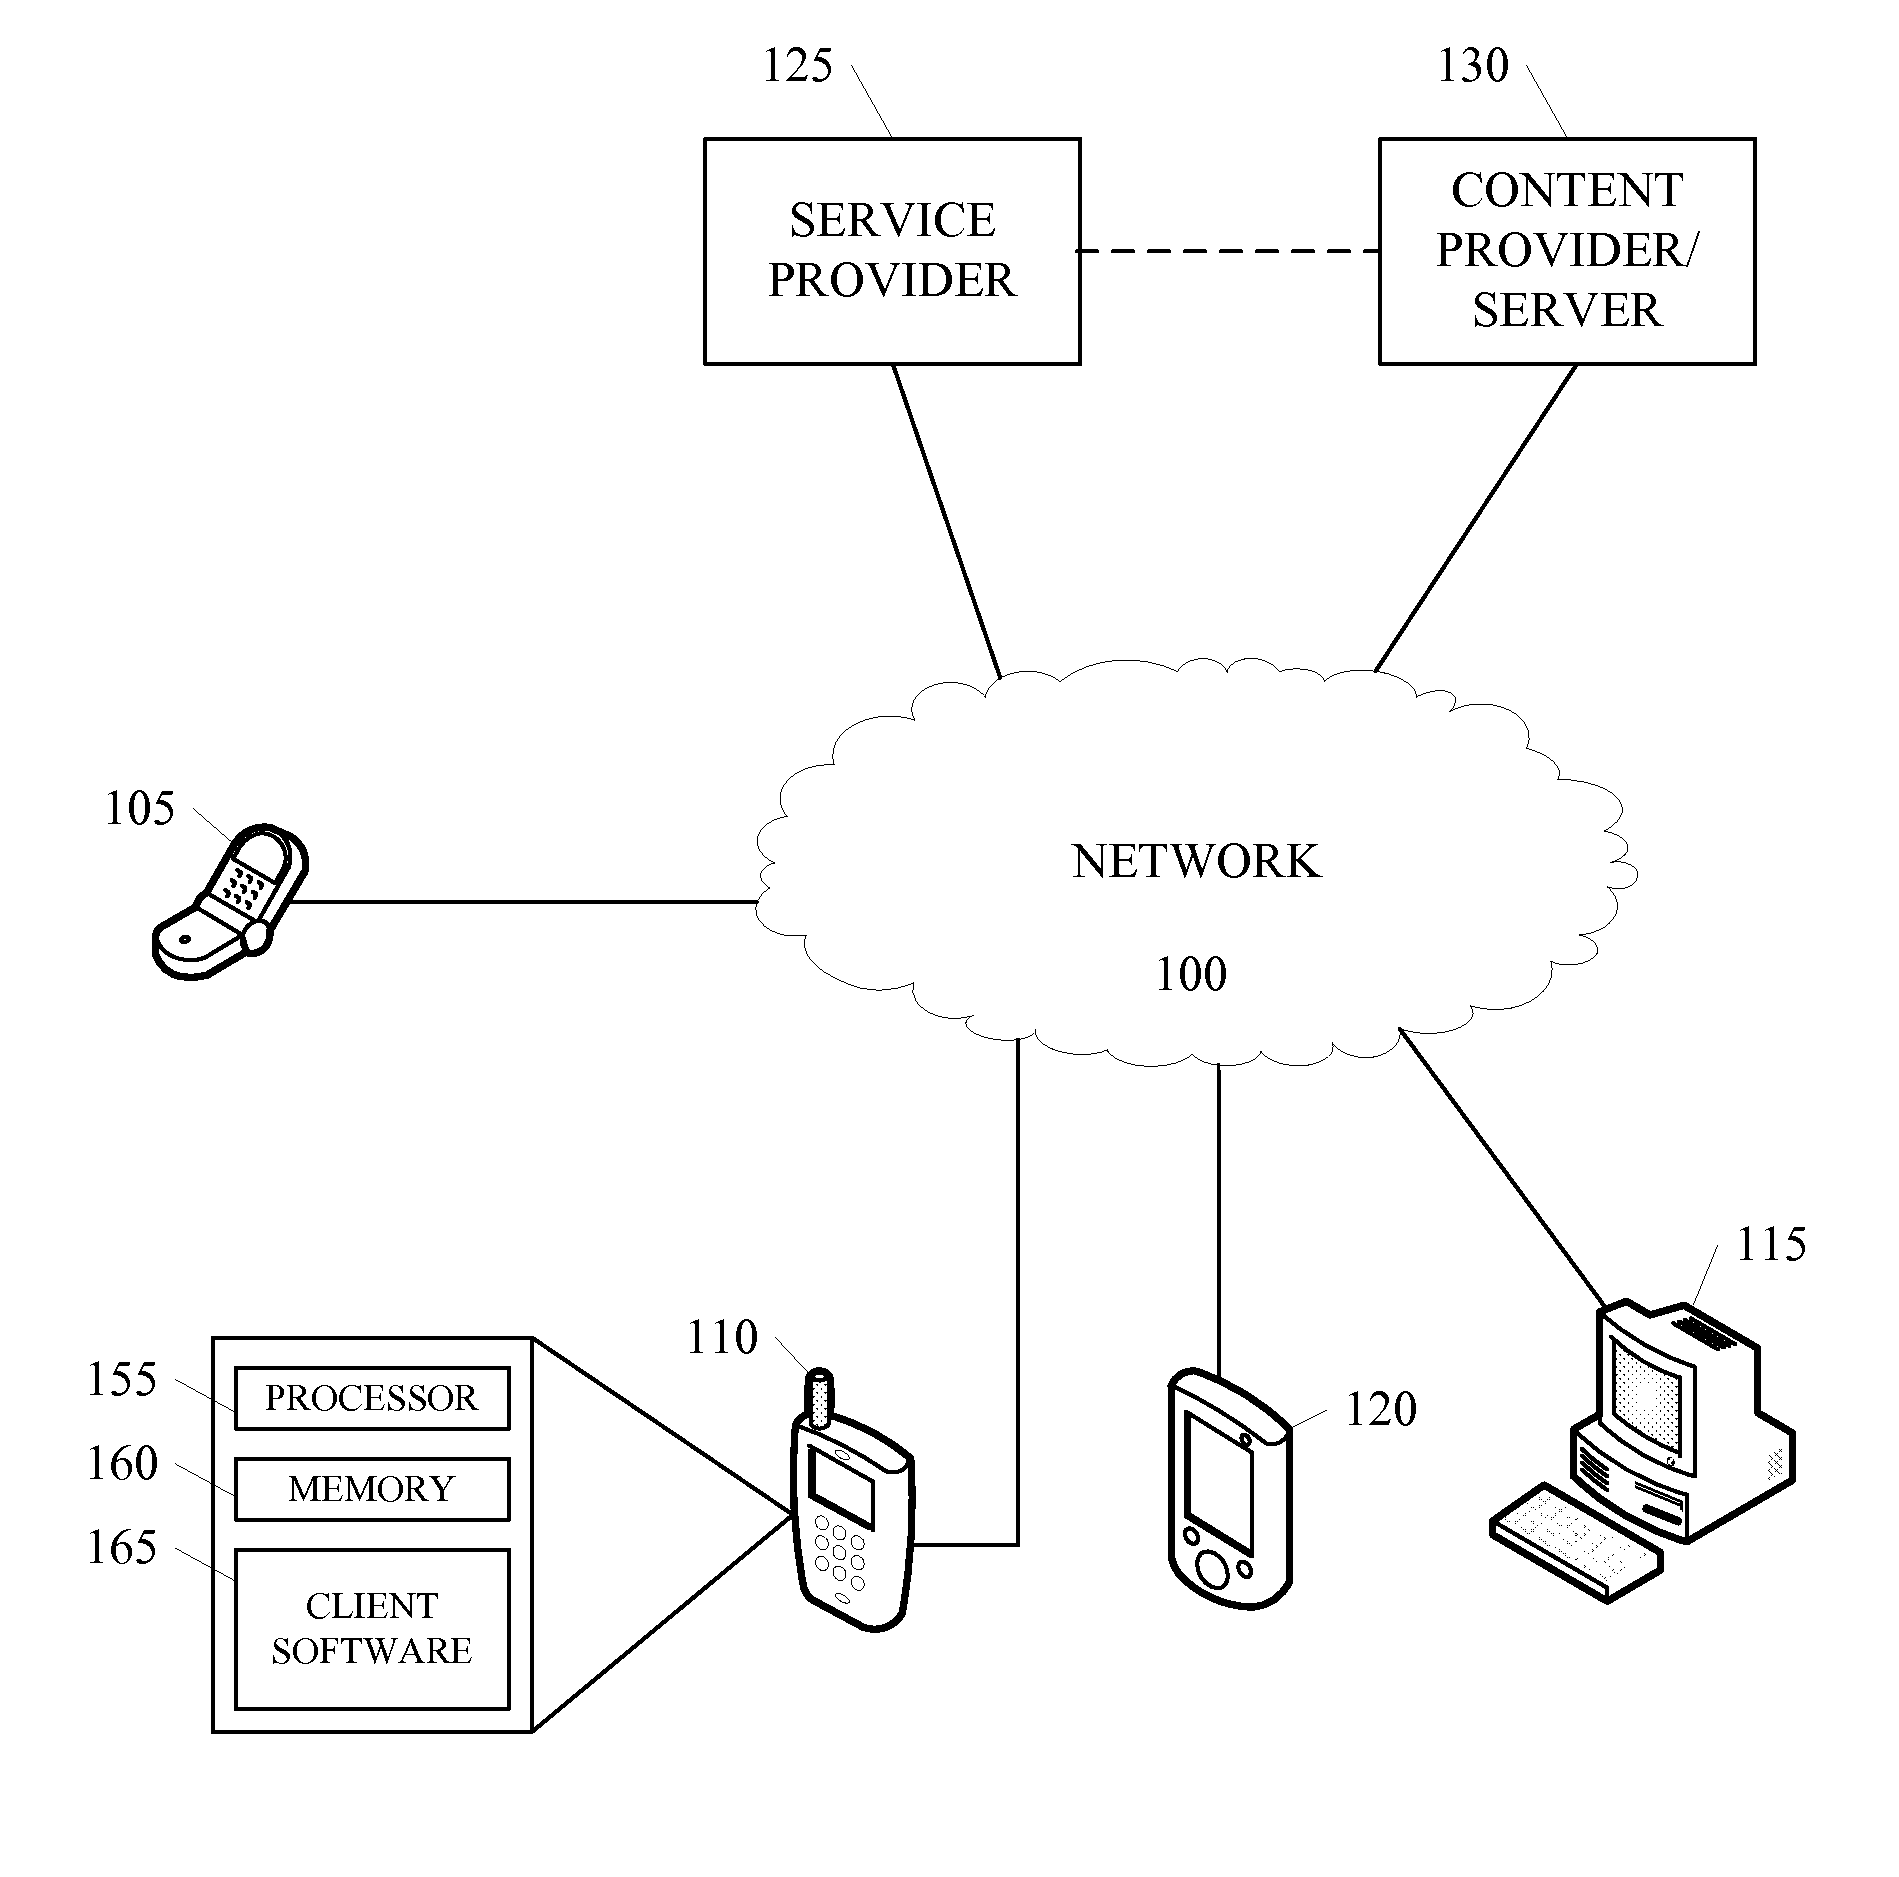 Accessing Service Guide Information in a Broadcast System